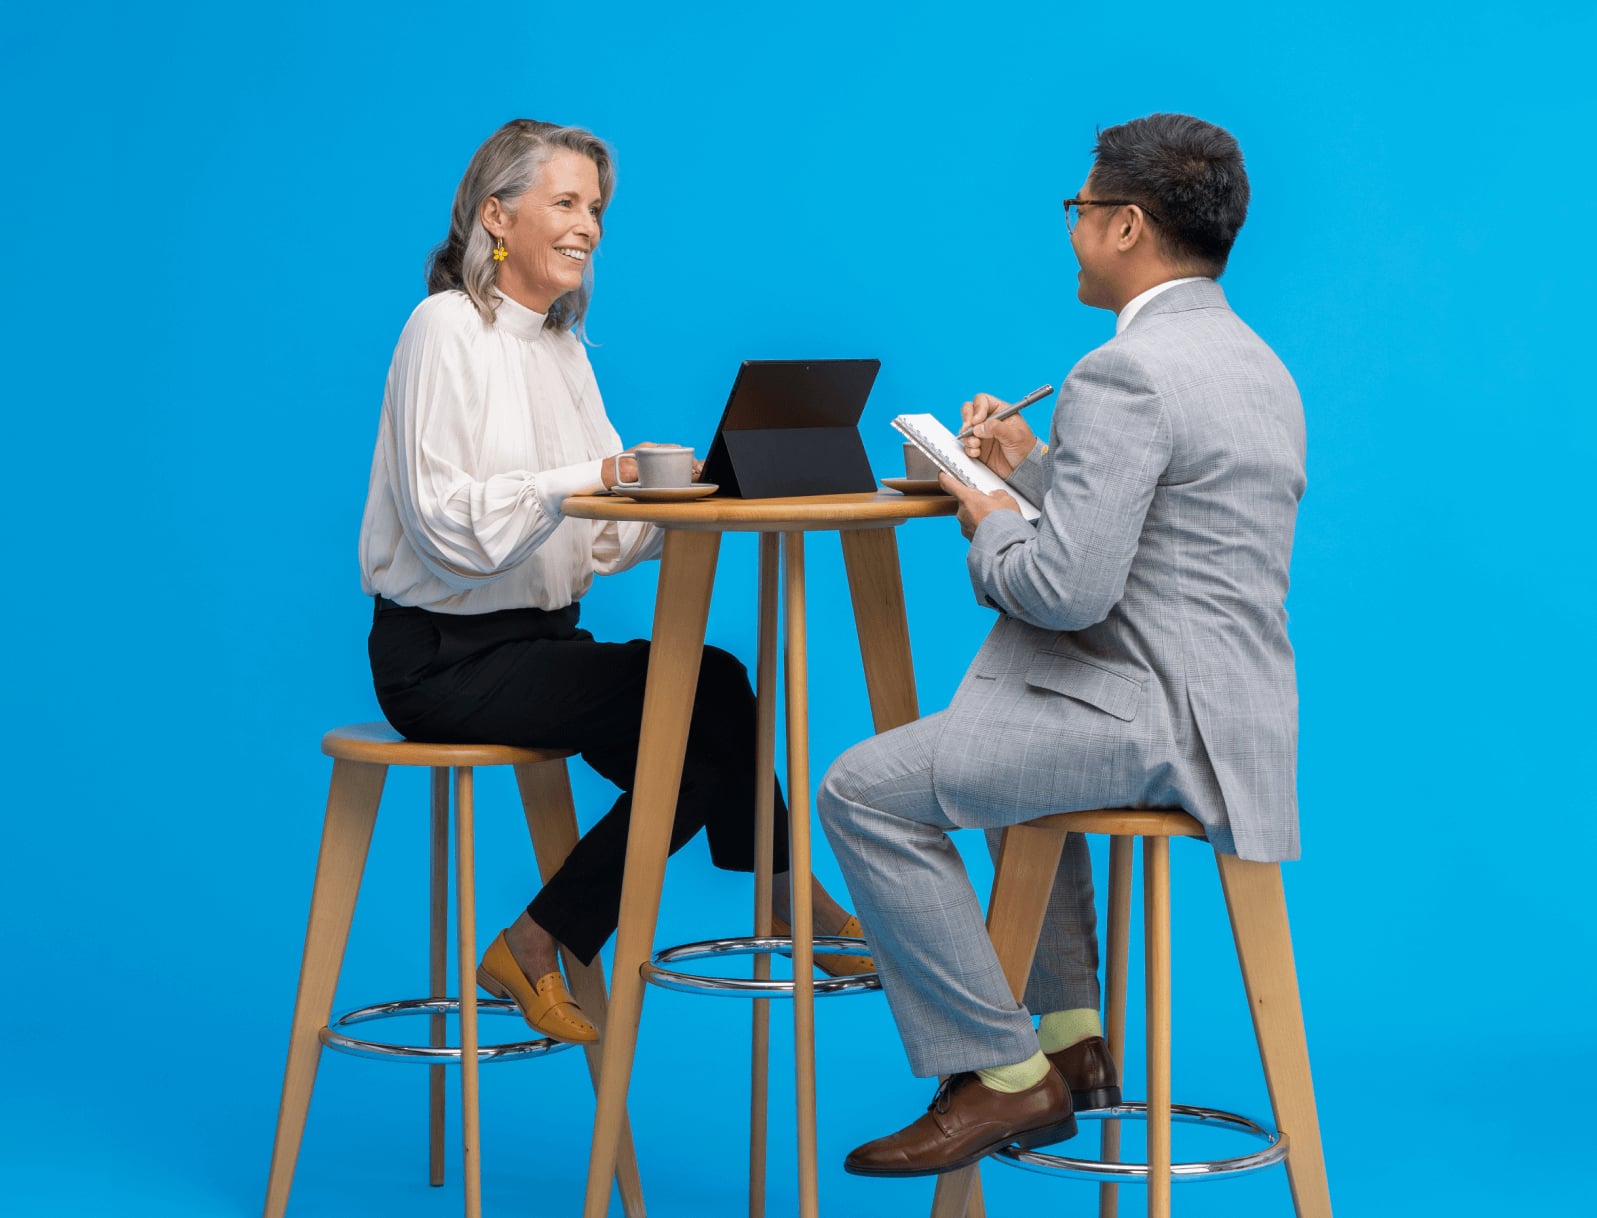 Two smartly dressed people meeting in blue space